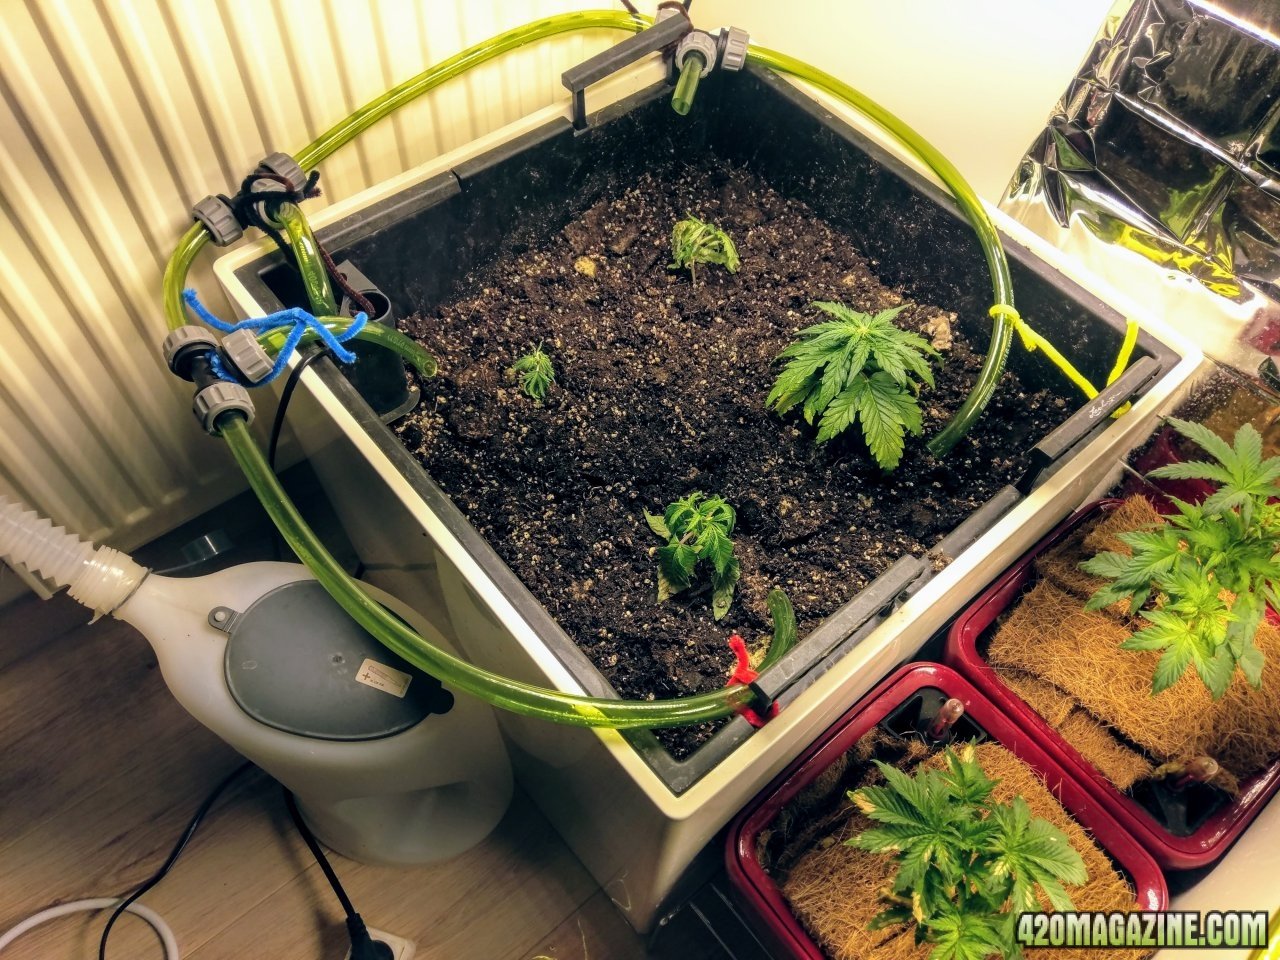 New auto watering system